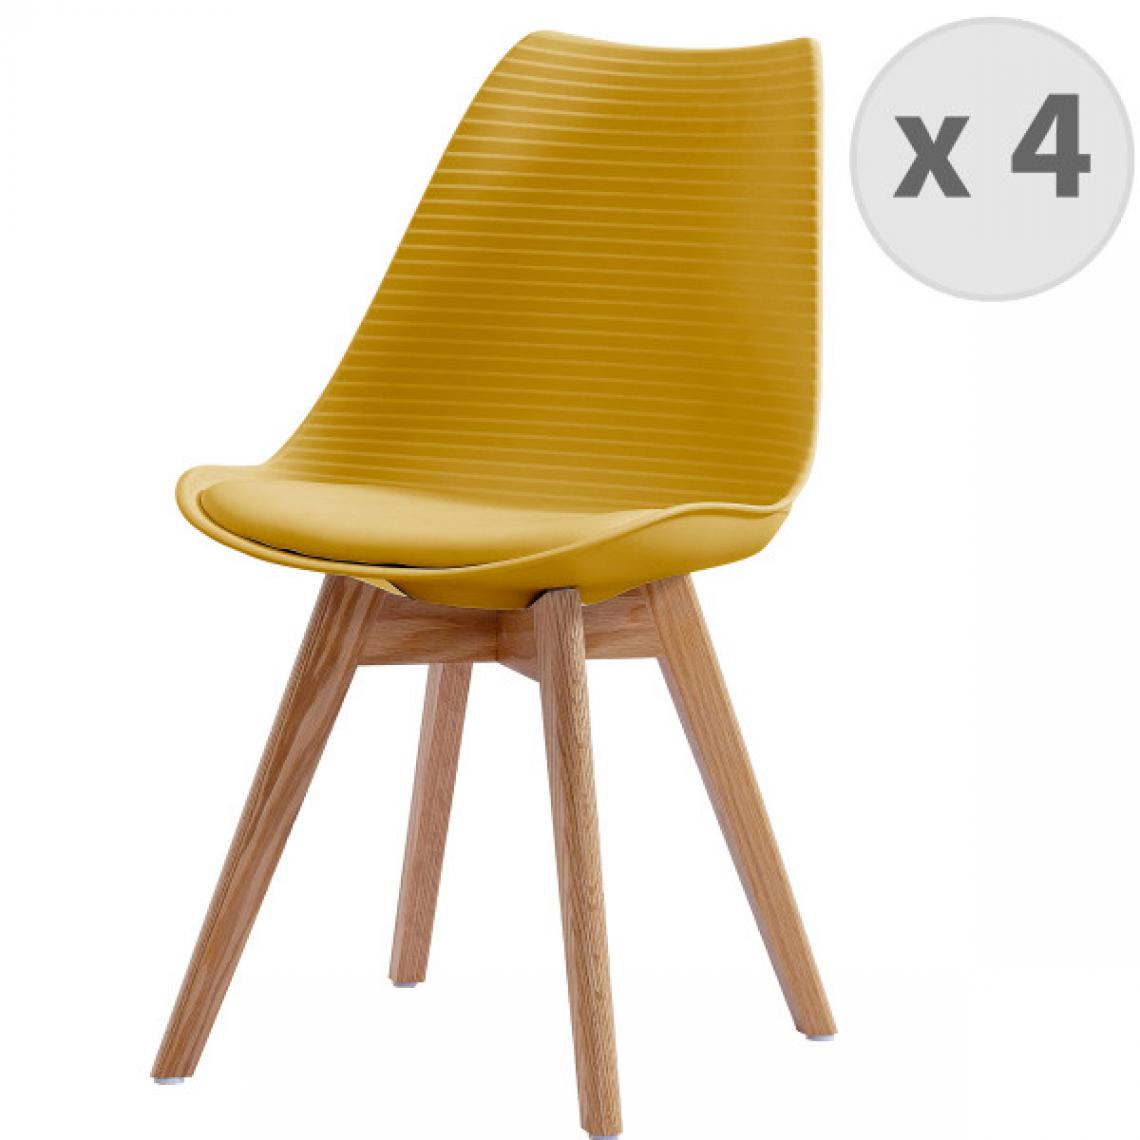 Moloo - BESSY-Chaise scandinave curry pieds chêne (x4) - Chaises